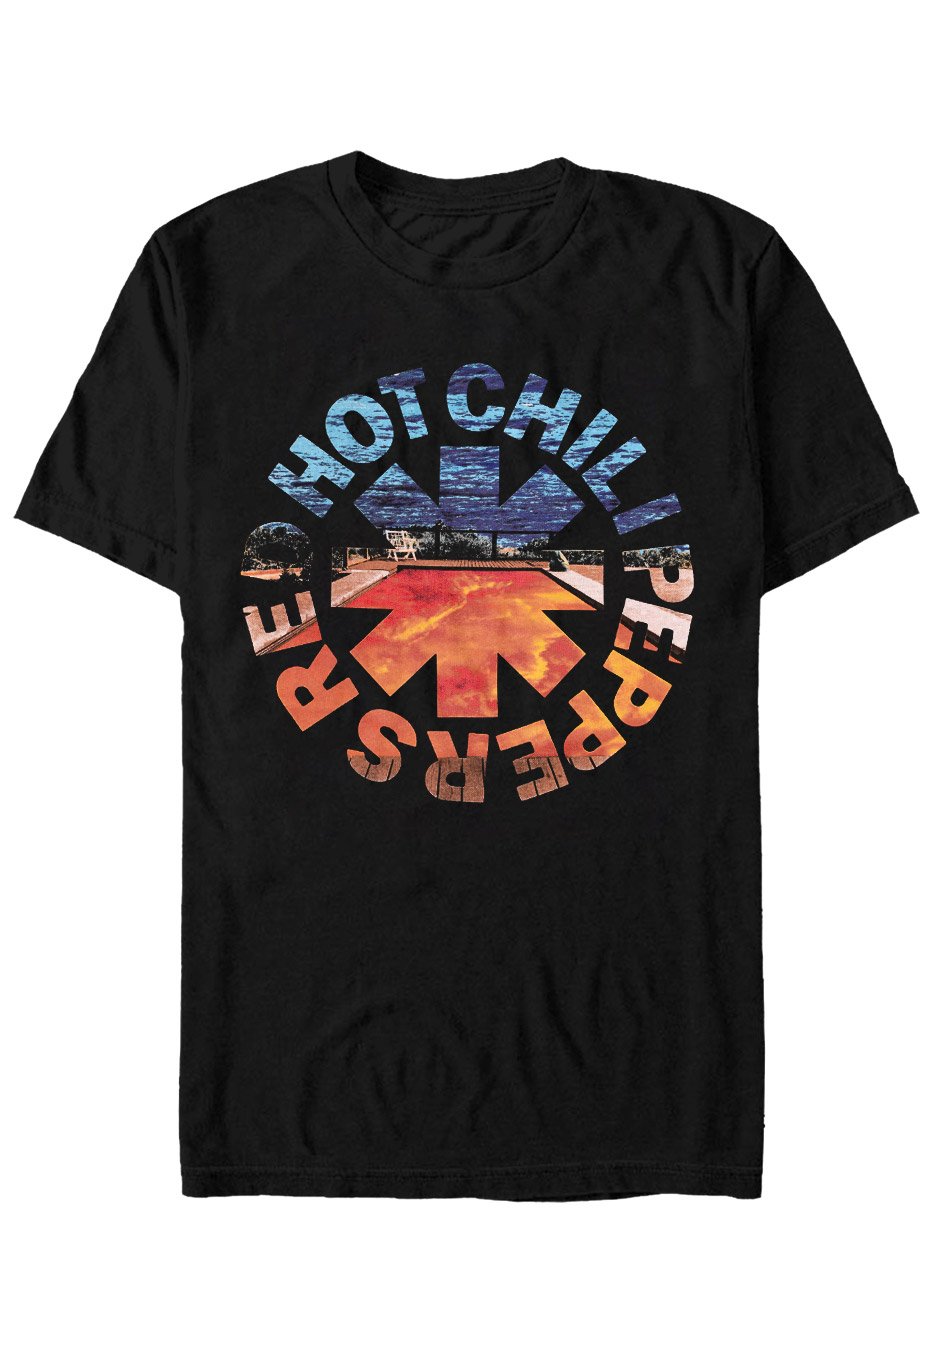 Red Hot Chili Peppers - Californication Asterisk - T-Shirt